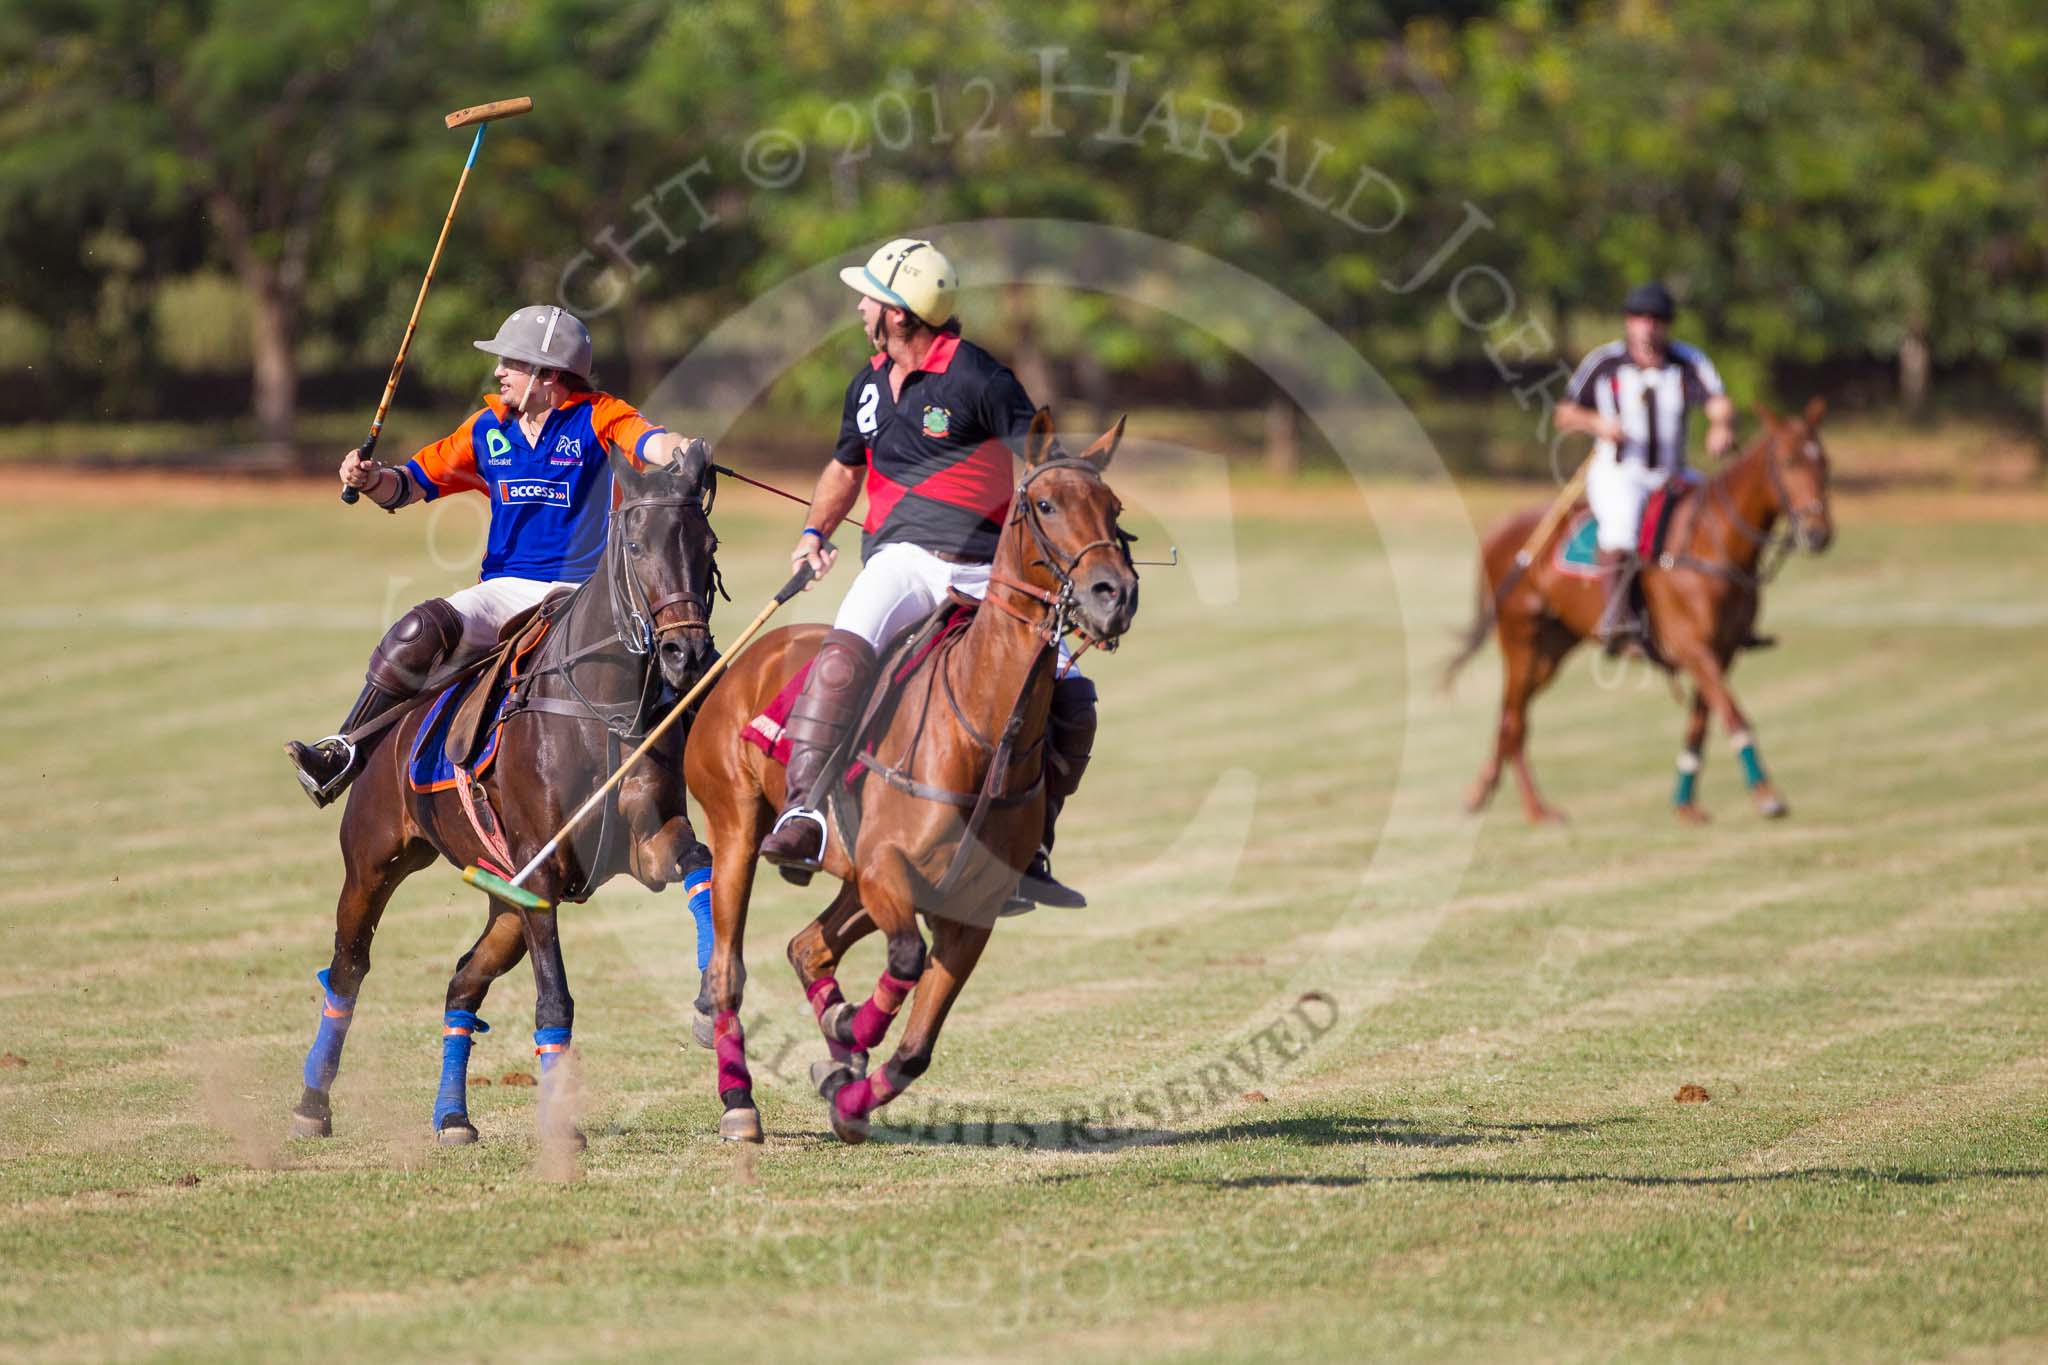 African Patrons Cup 2012 (Friday): Match Access Bank Fifth Chukker v Keffi Ponies: Ezequiel Martinez Ferrario v Selby Williamson..
Fifth Chukker Polo & Country Club,
Kaduna,
Kaduna State,
Nigeria,
on 02 November 2012 at 15:47, image #47